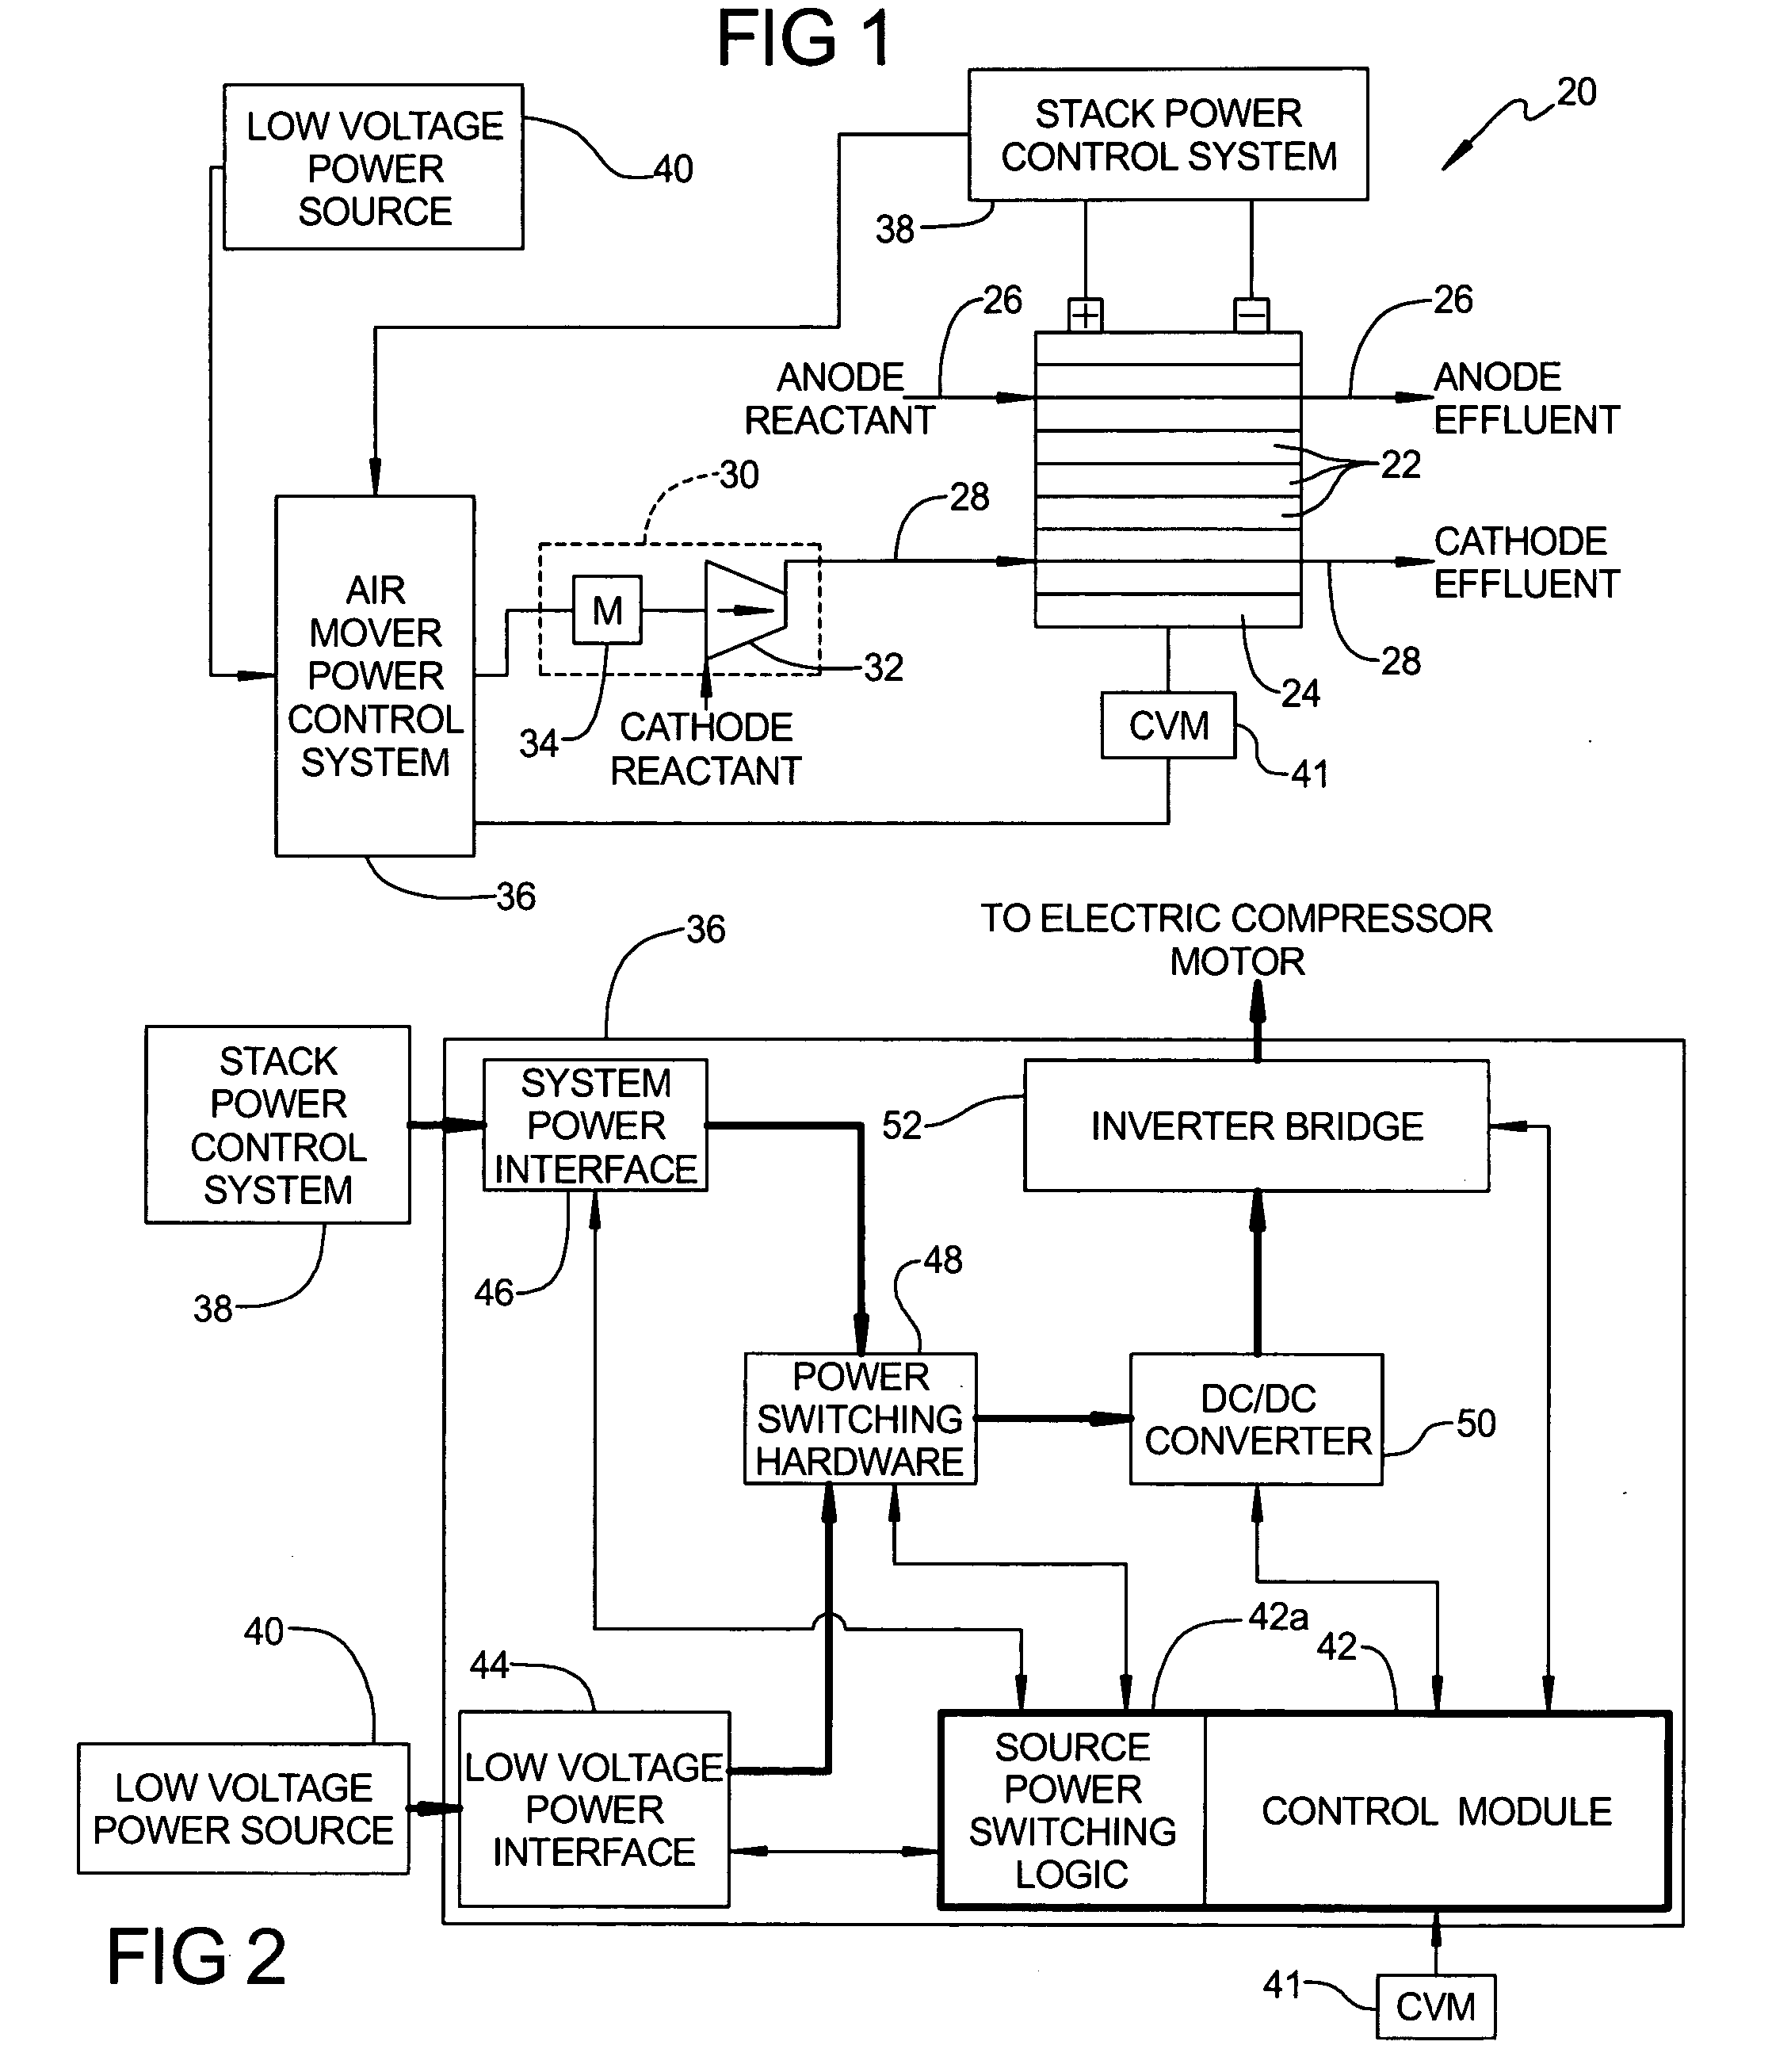 Low voltage compressor operation for a fuel cell power system